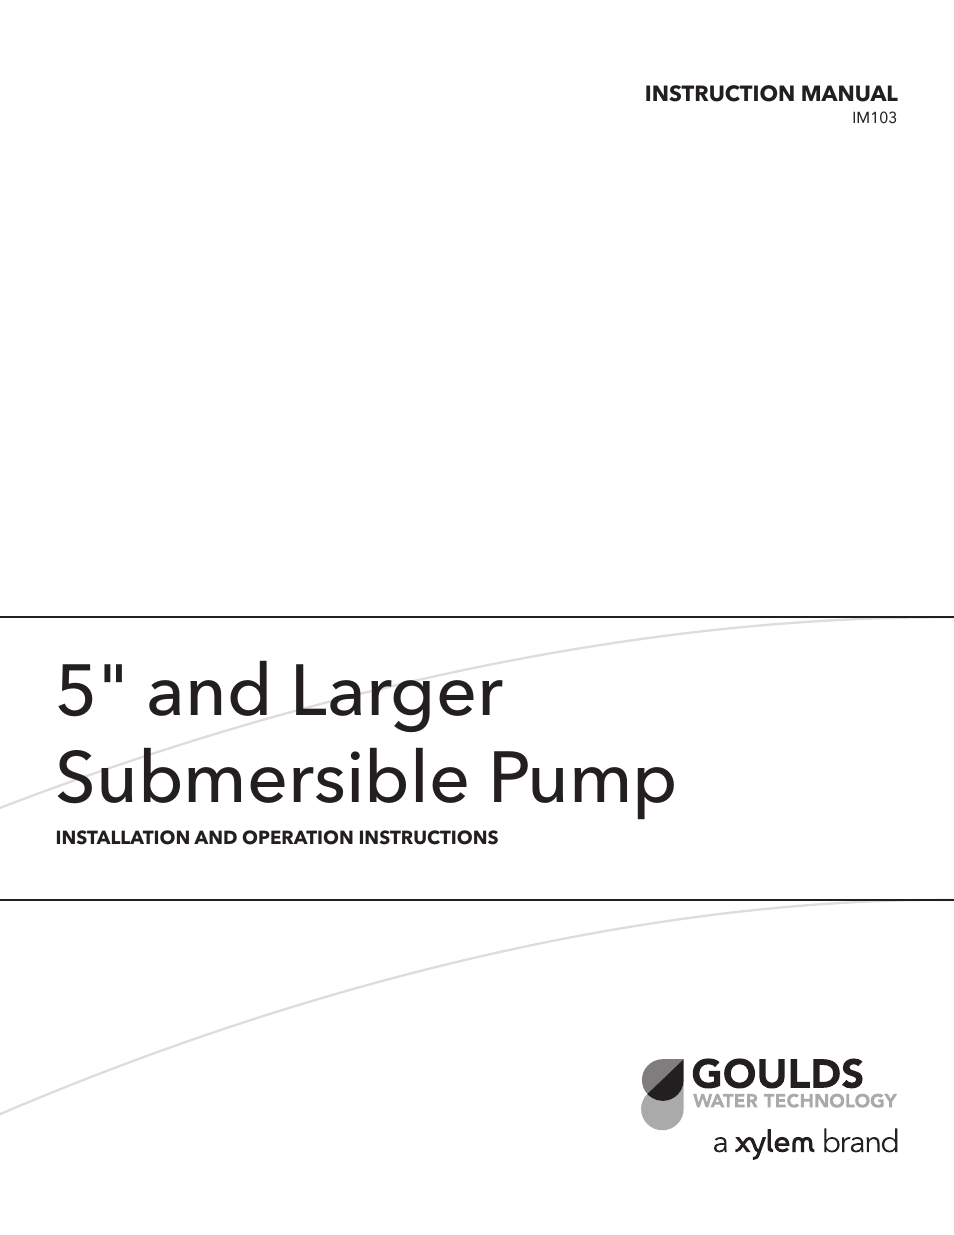 IM103 R03 5 and Larger Submersible Pump